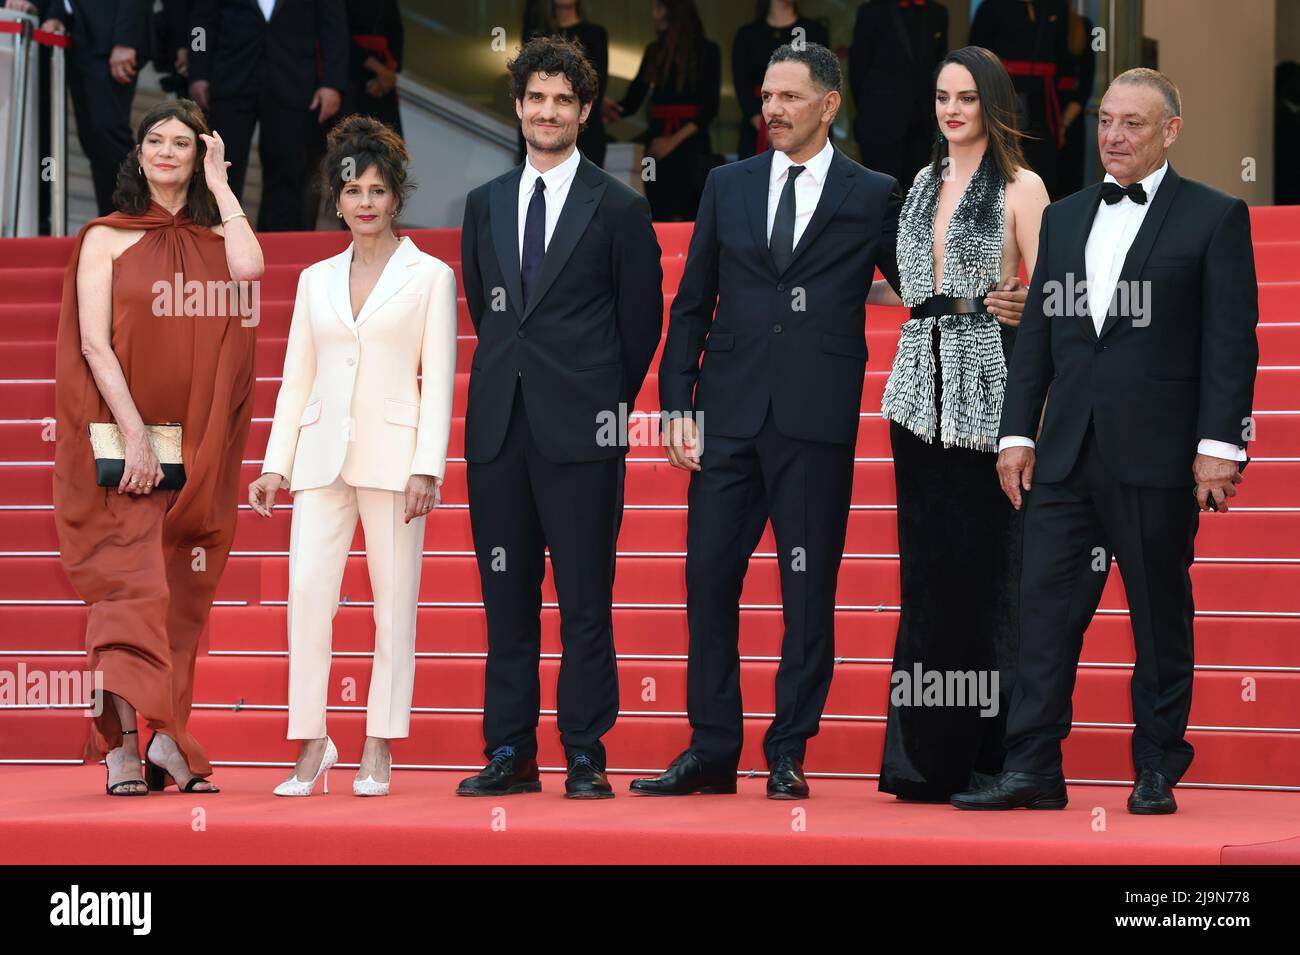 (L to R) Anne-Dominique Toussaint, Anouk Grinberg, Louis Garrel, Roschdy Zem, and Noemie Merlant attend the 75th Anniversary celebration screening of 'The Innocent (L'Innocent)' during the 75th Cannes Film Festival in Cannes, France. Stock Photo